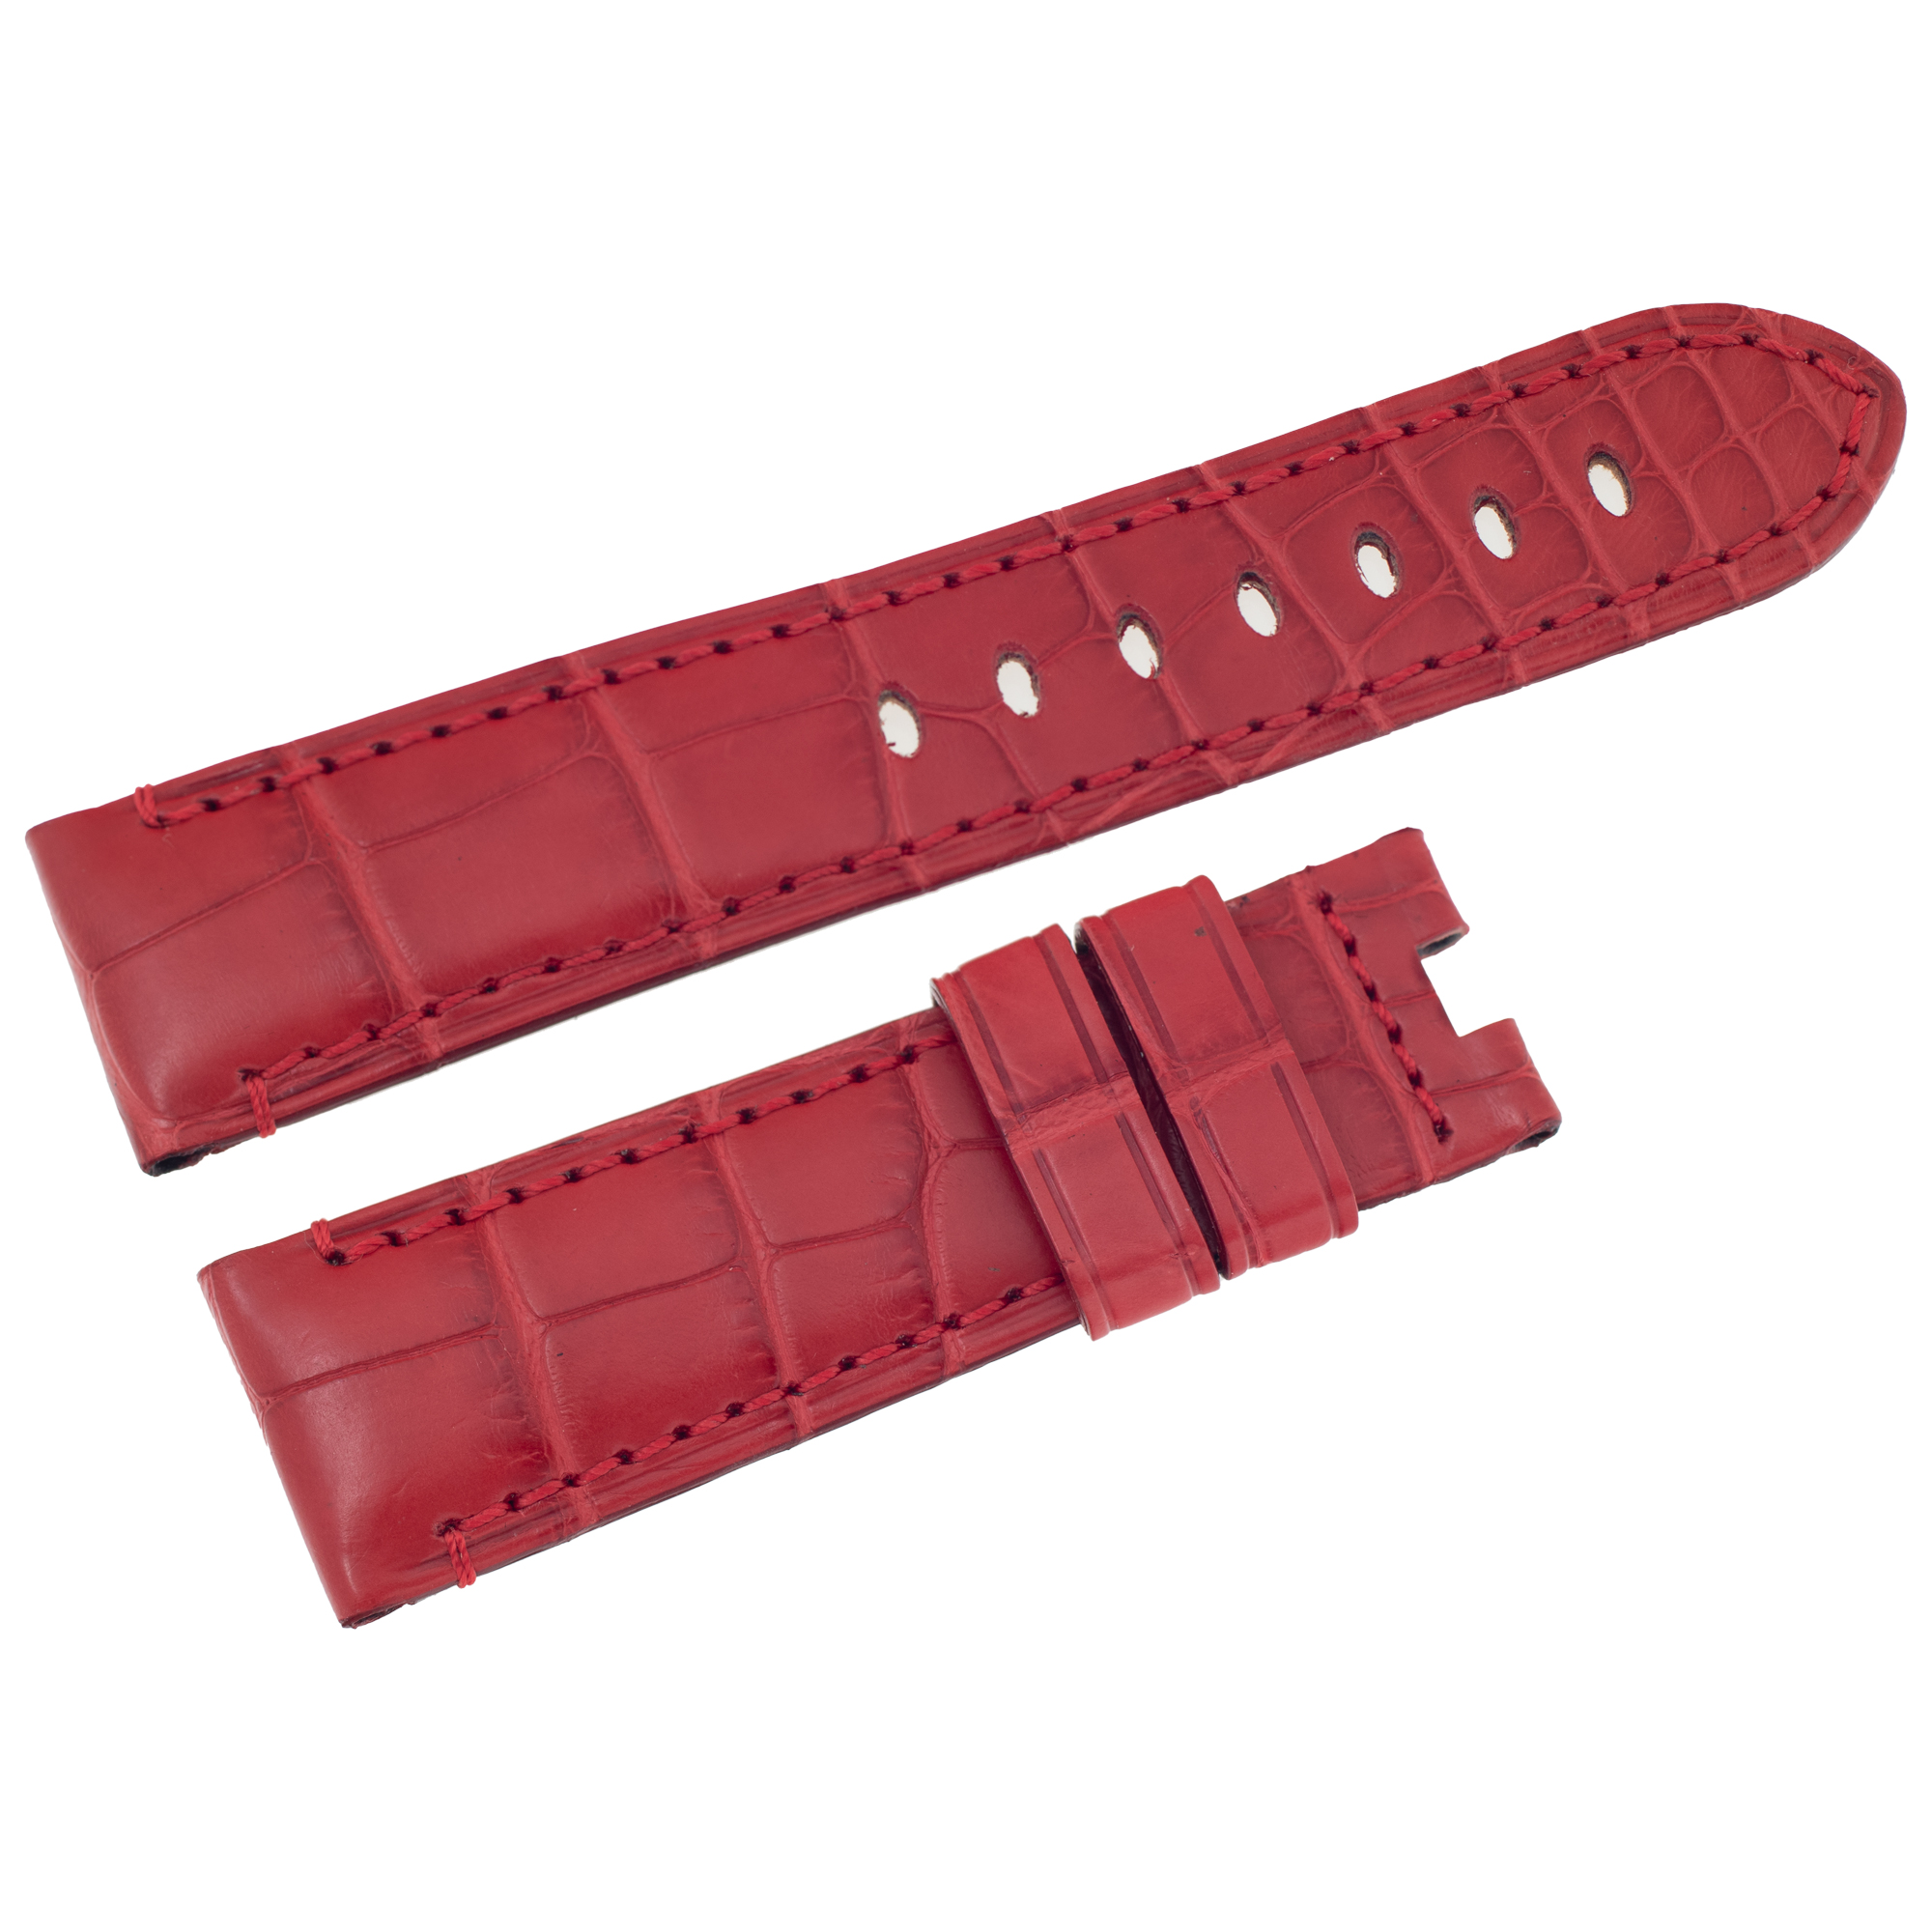 Panerai Red Semi-matte alligator strap for tang buckle (22mm x 20mm)